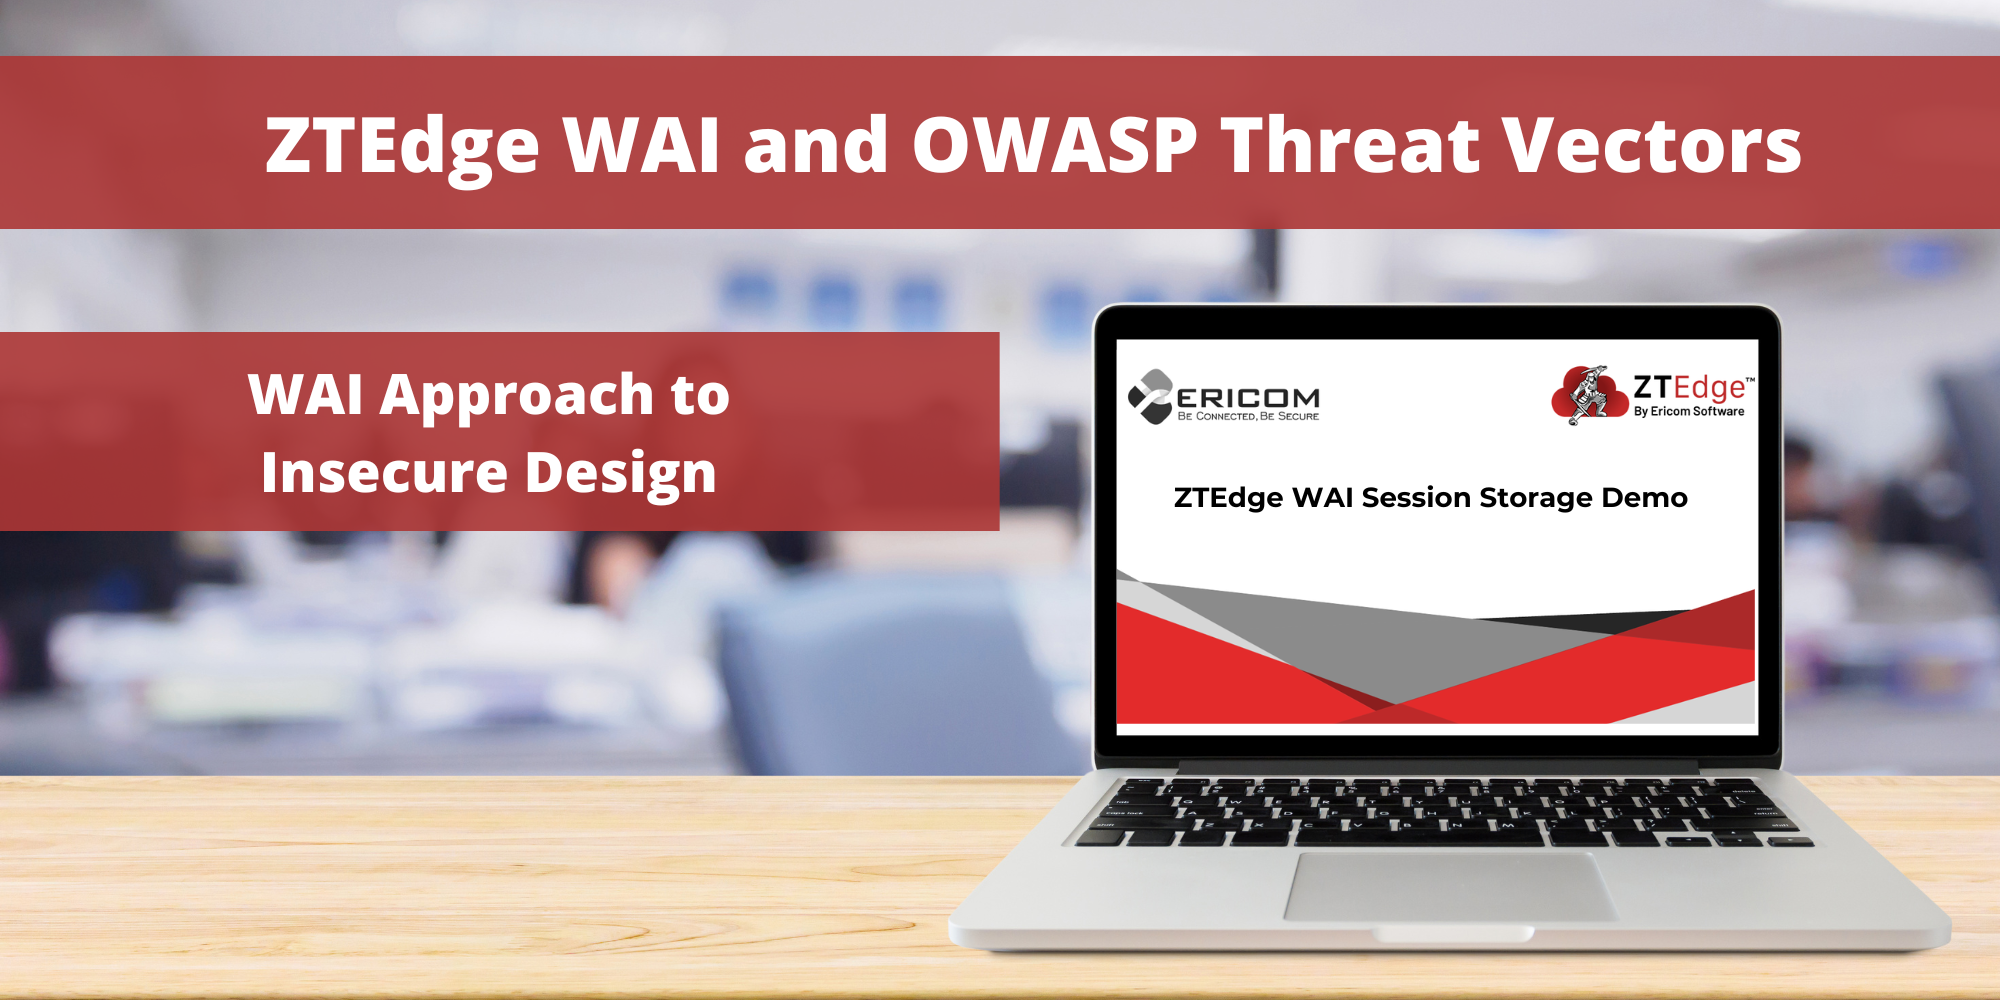 Addressing the OWASP Top 10 Application Security Risks with Web Application Isolation: #4 Insecure Design featured image